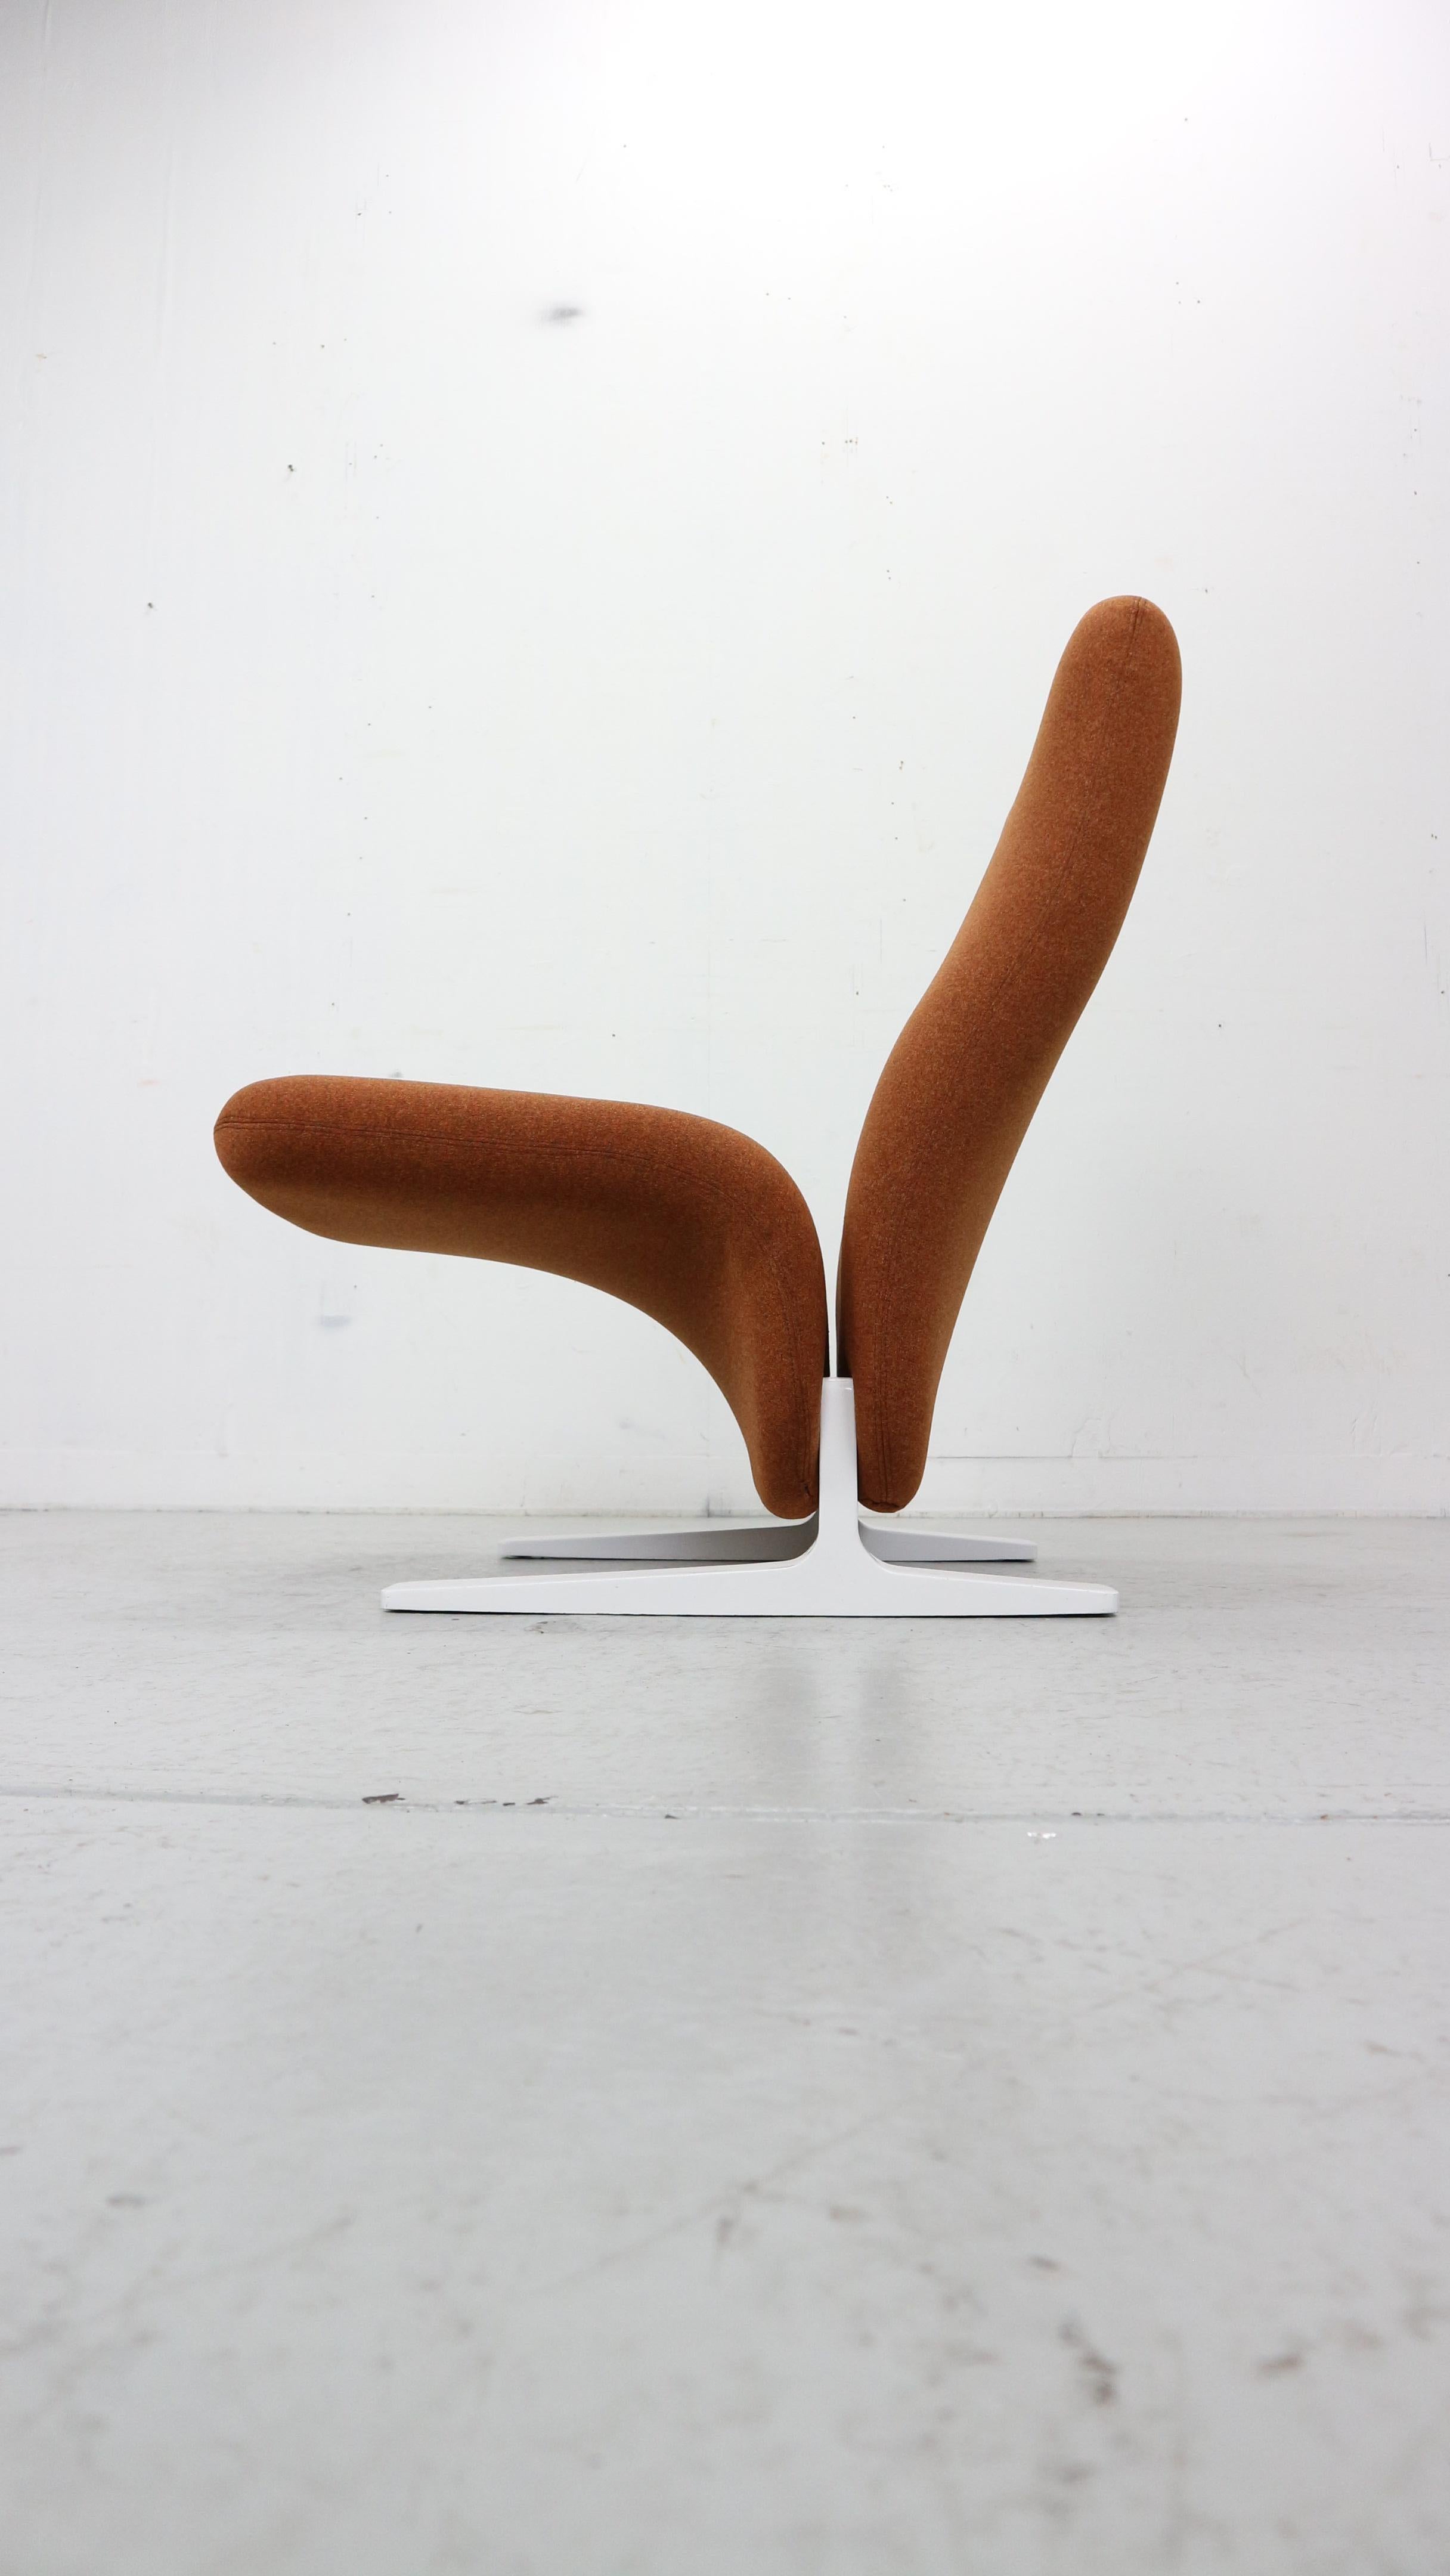 The Concorde or F780 is an iconic easy lounge chair designed by French designer Pierre Paulin for furniture manufacturer Artifort. This iconic chair is named after the French Concorde aircraft which he also designed, this comfortable and minimal